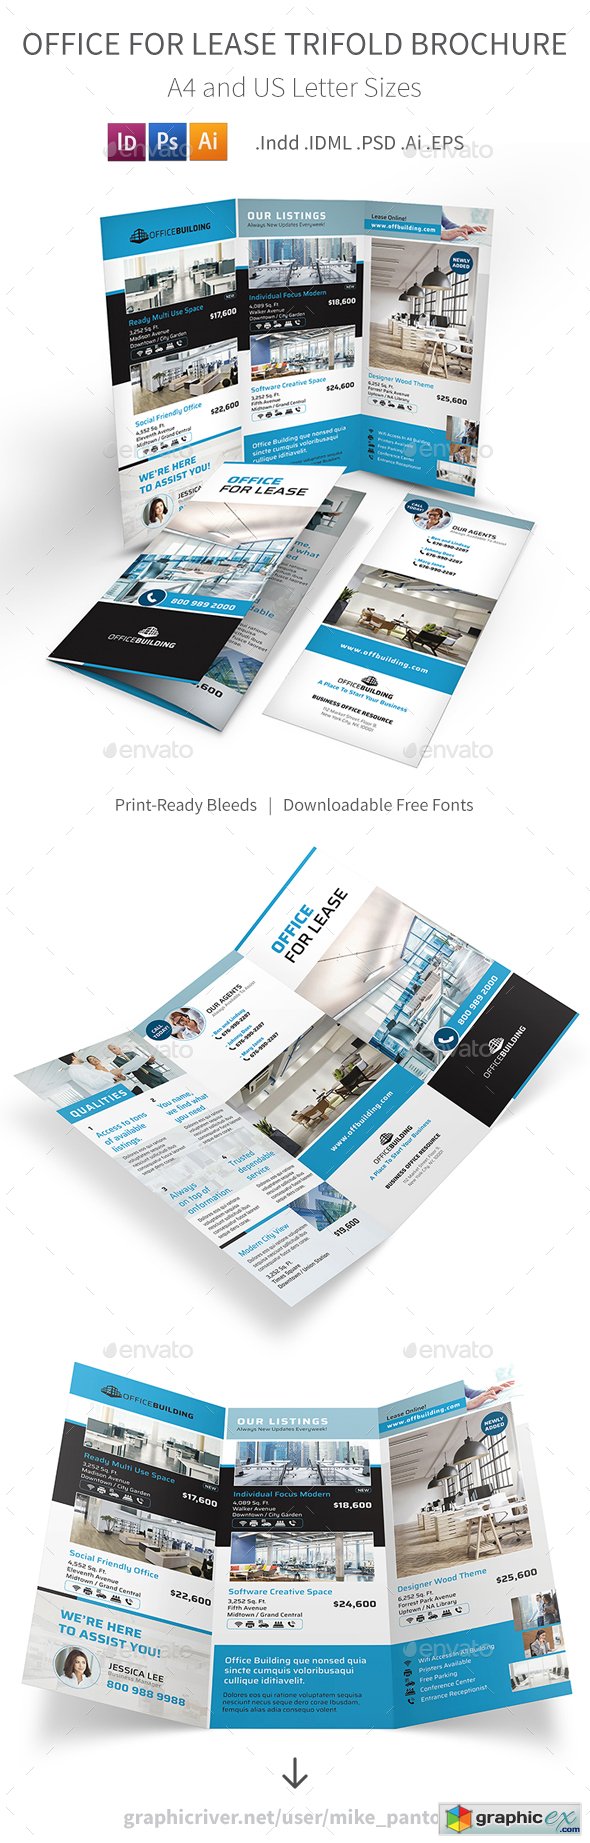 Office For Lease Trifold Brochure